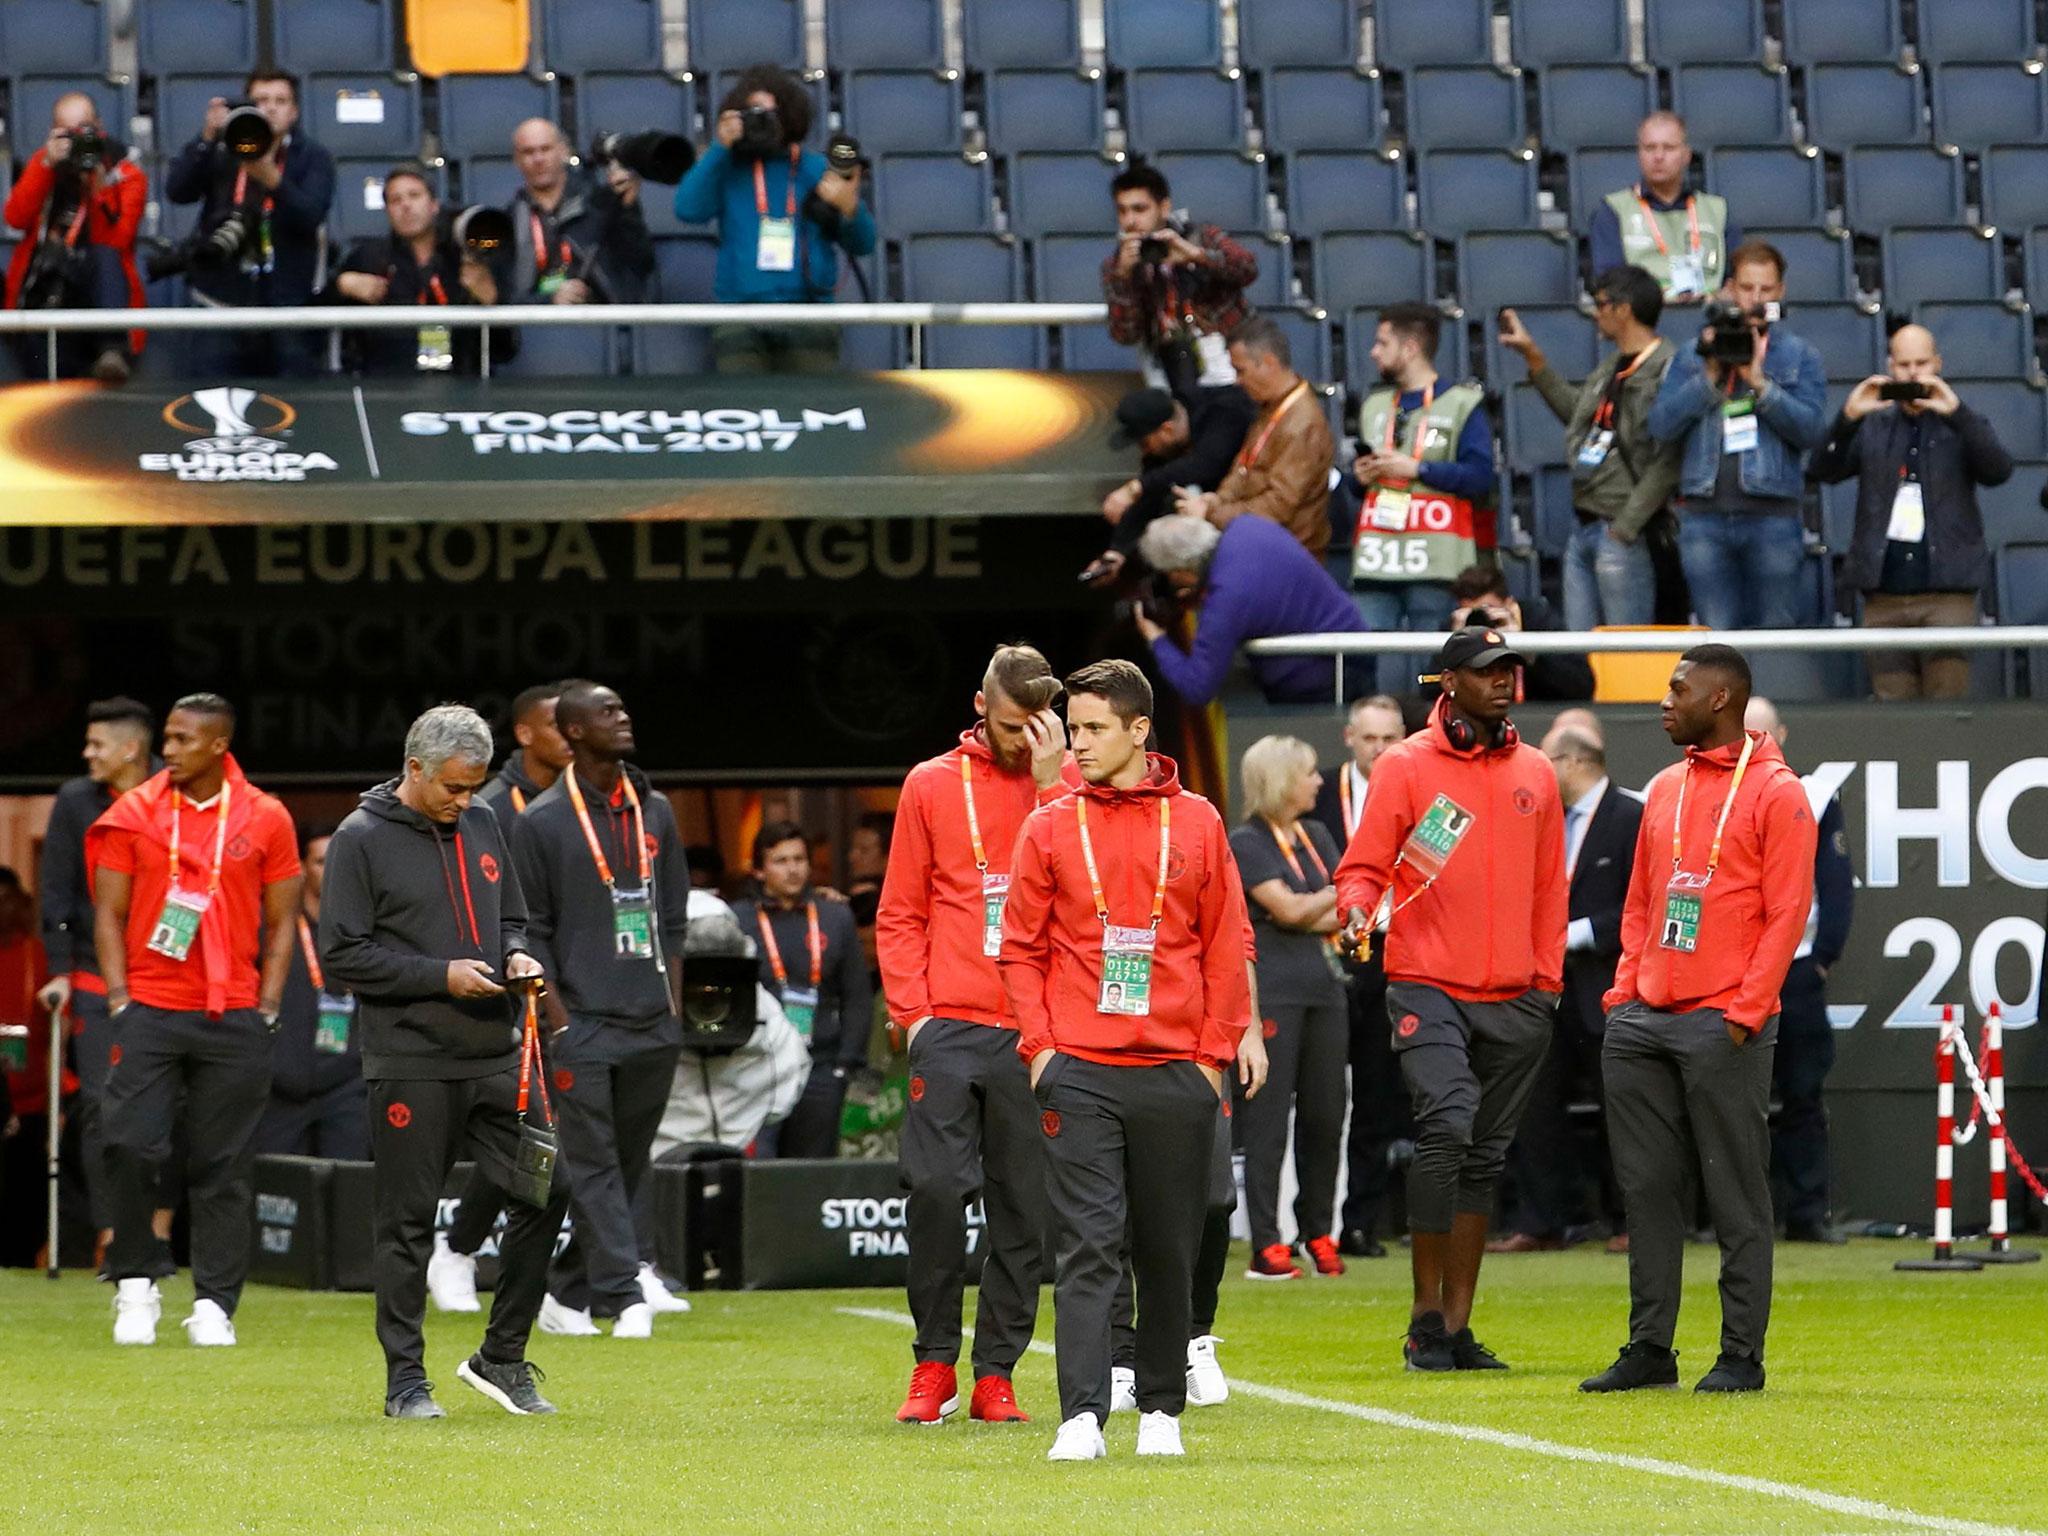 United's players are prepared to go ahead with the final despite Monday's attack